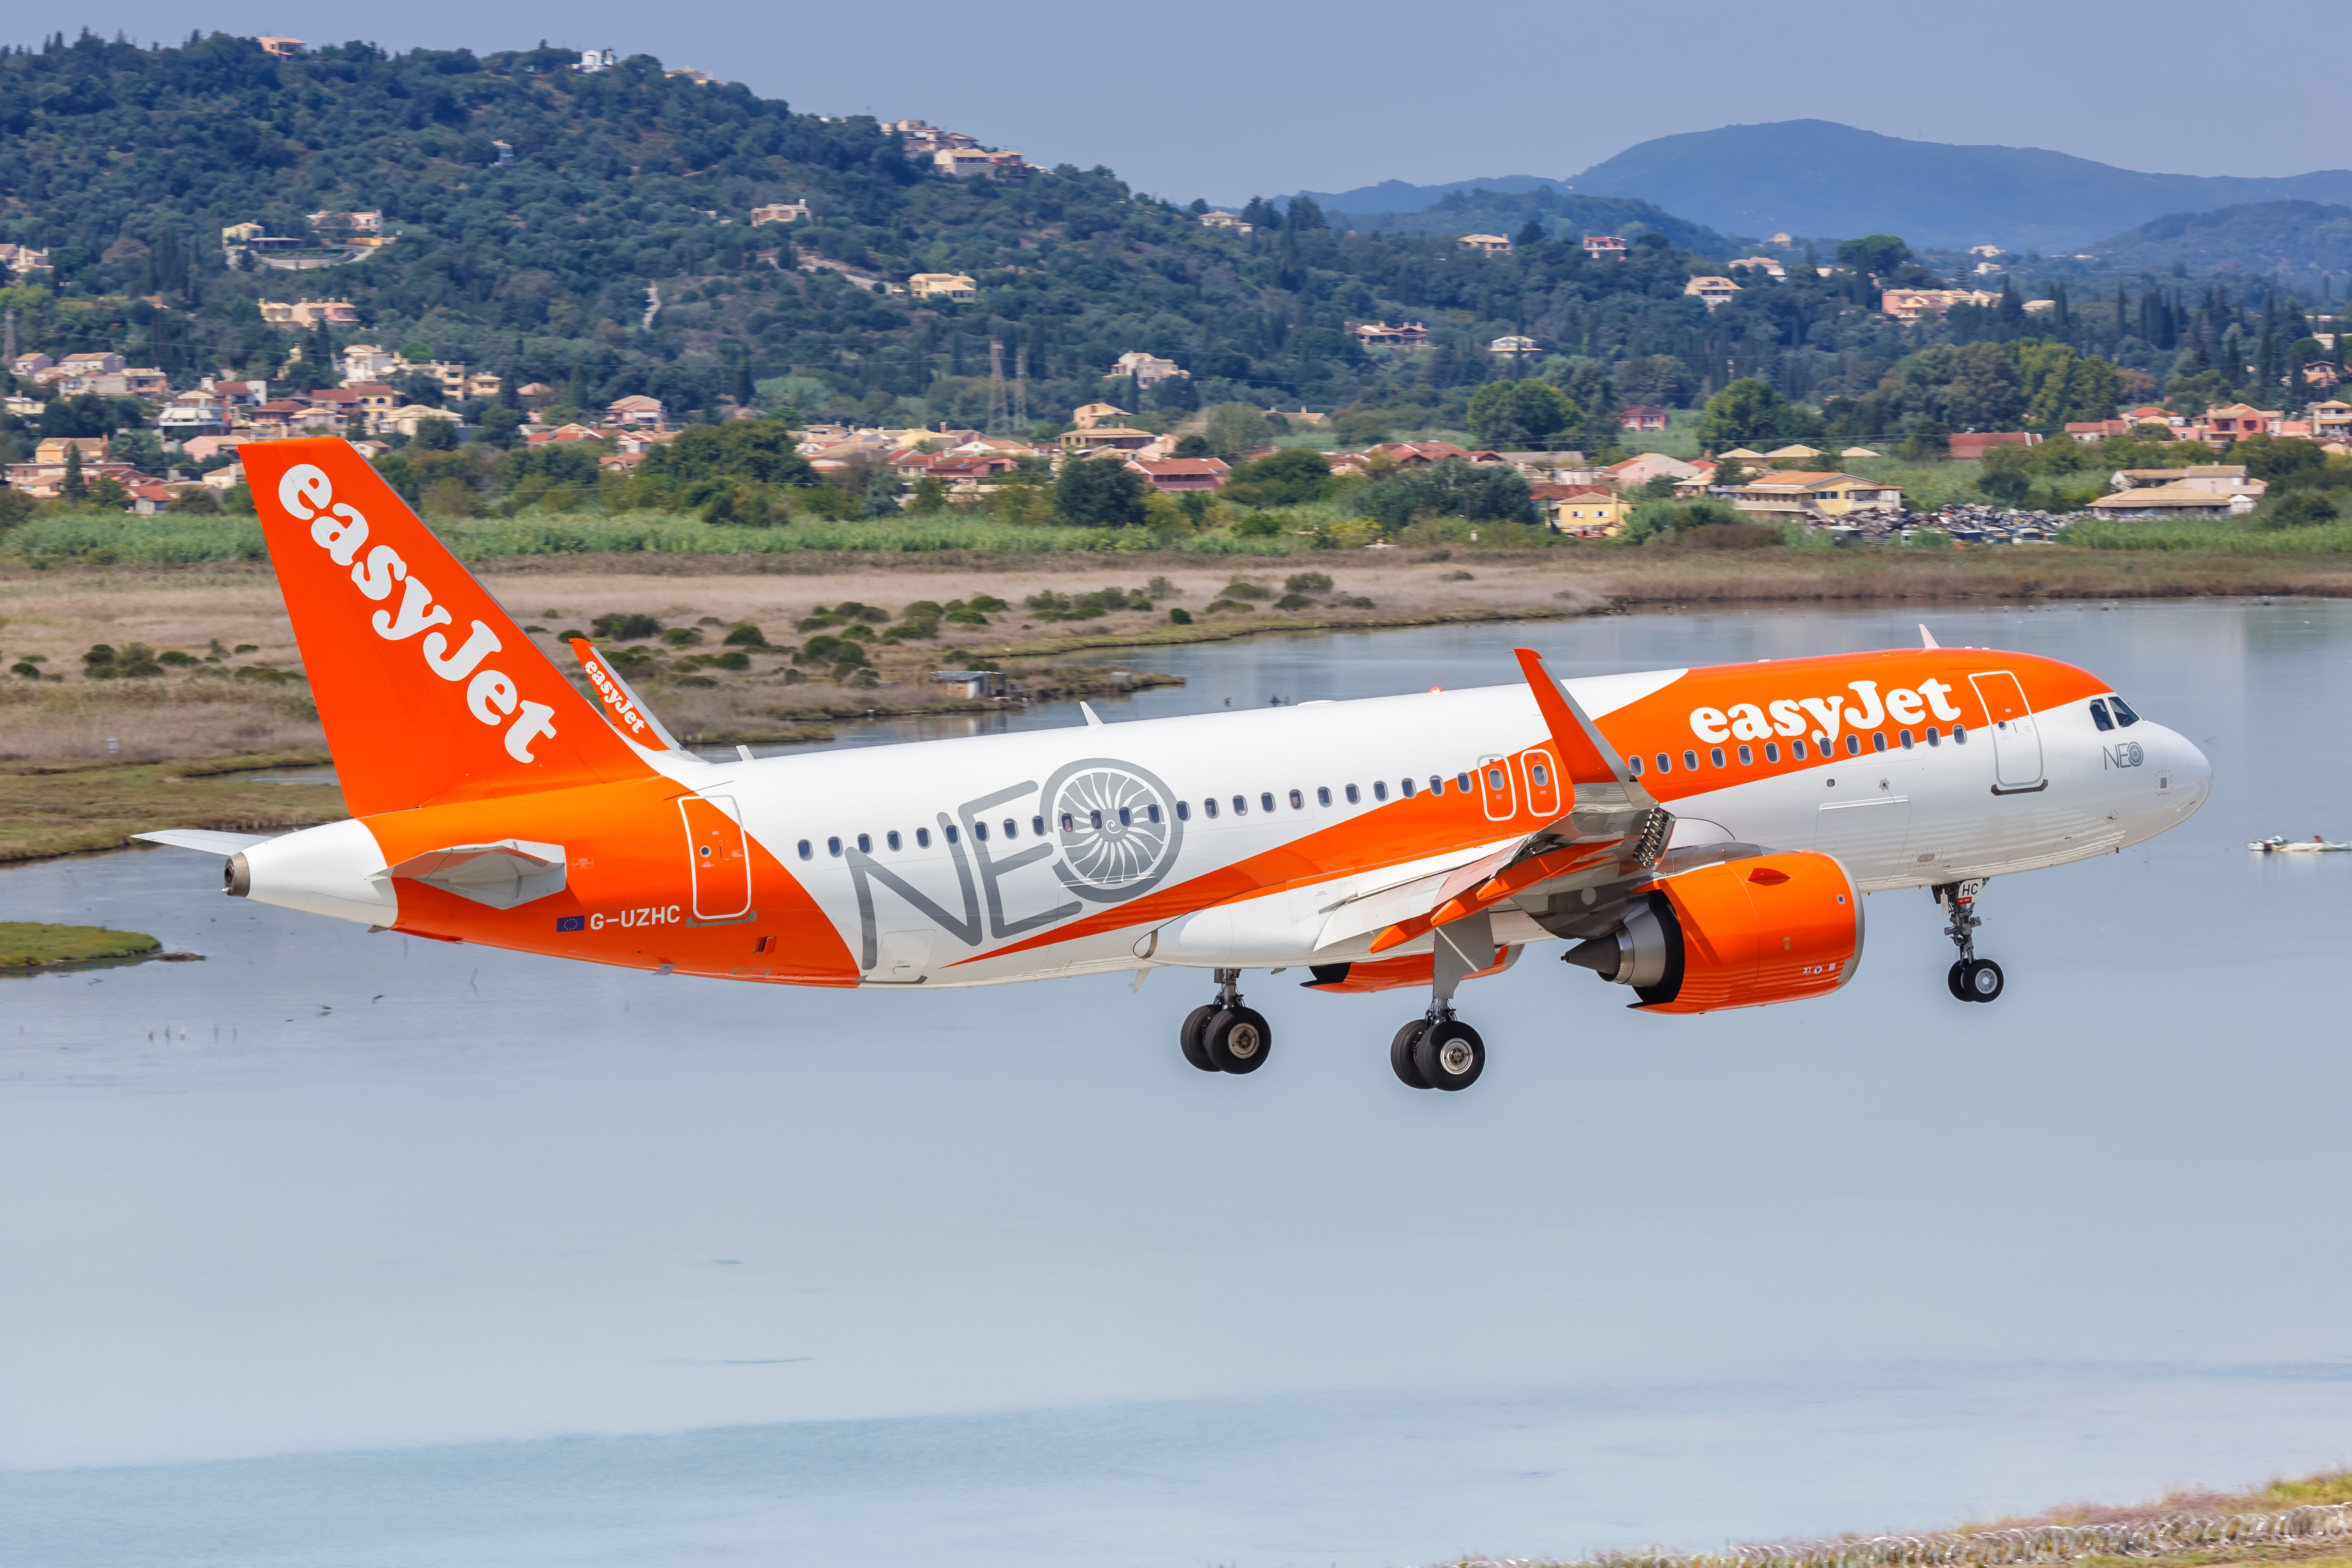 An easyJet Airbus A320neo aircraft taking off from Corfu Airport in Greece.